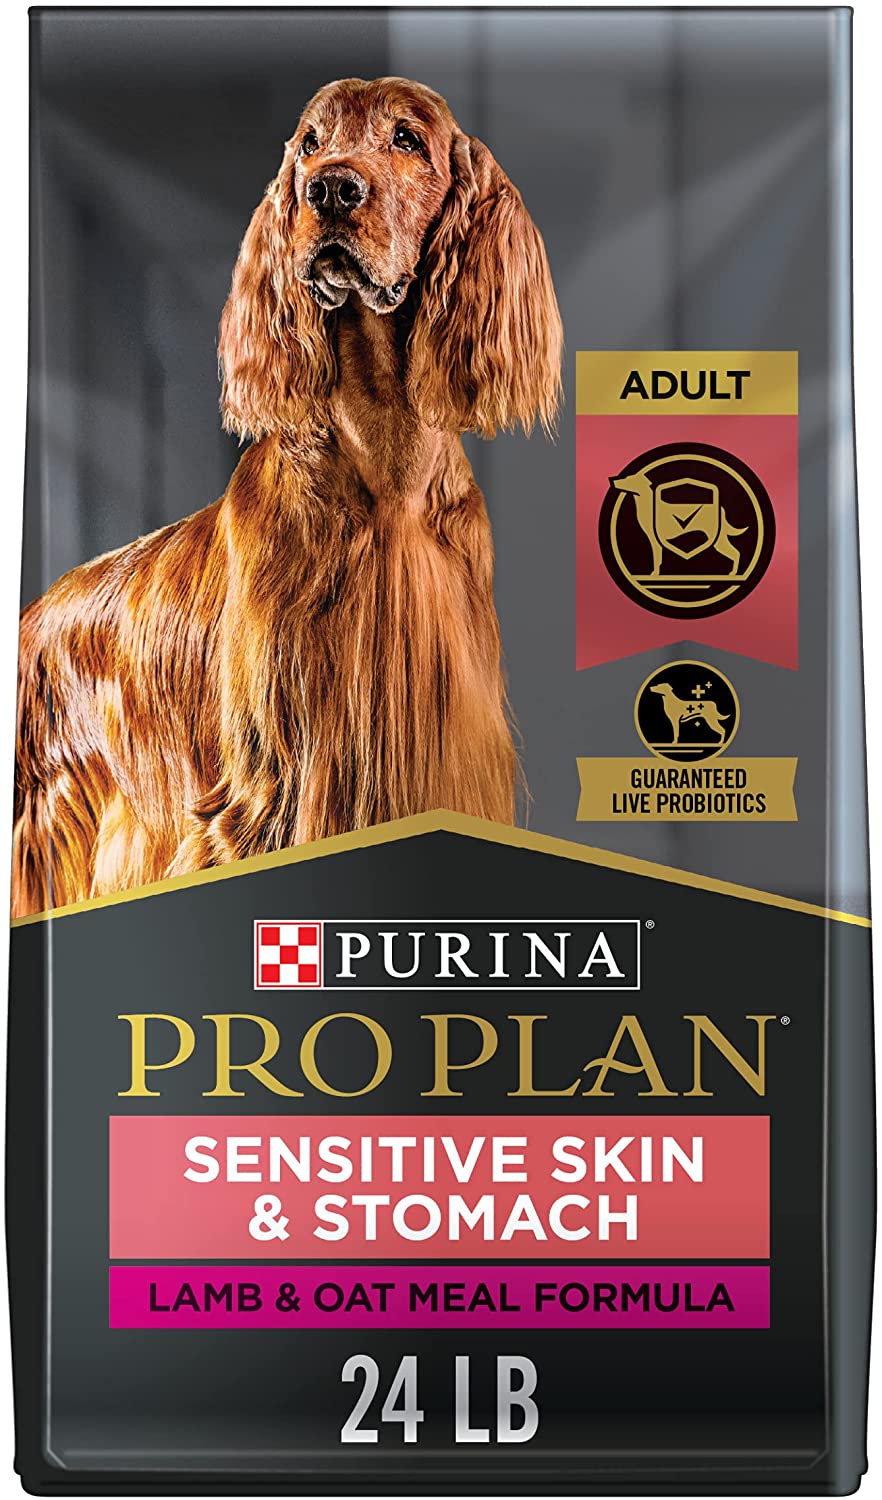 Pro-Plan-Adult-Sensitive-Skin-and-Stomach-Dog-Food